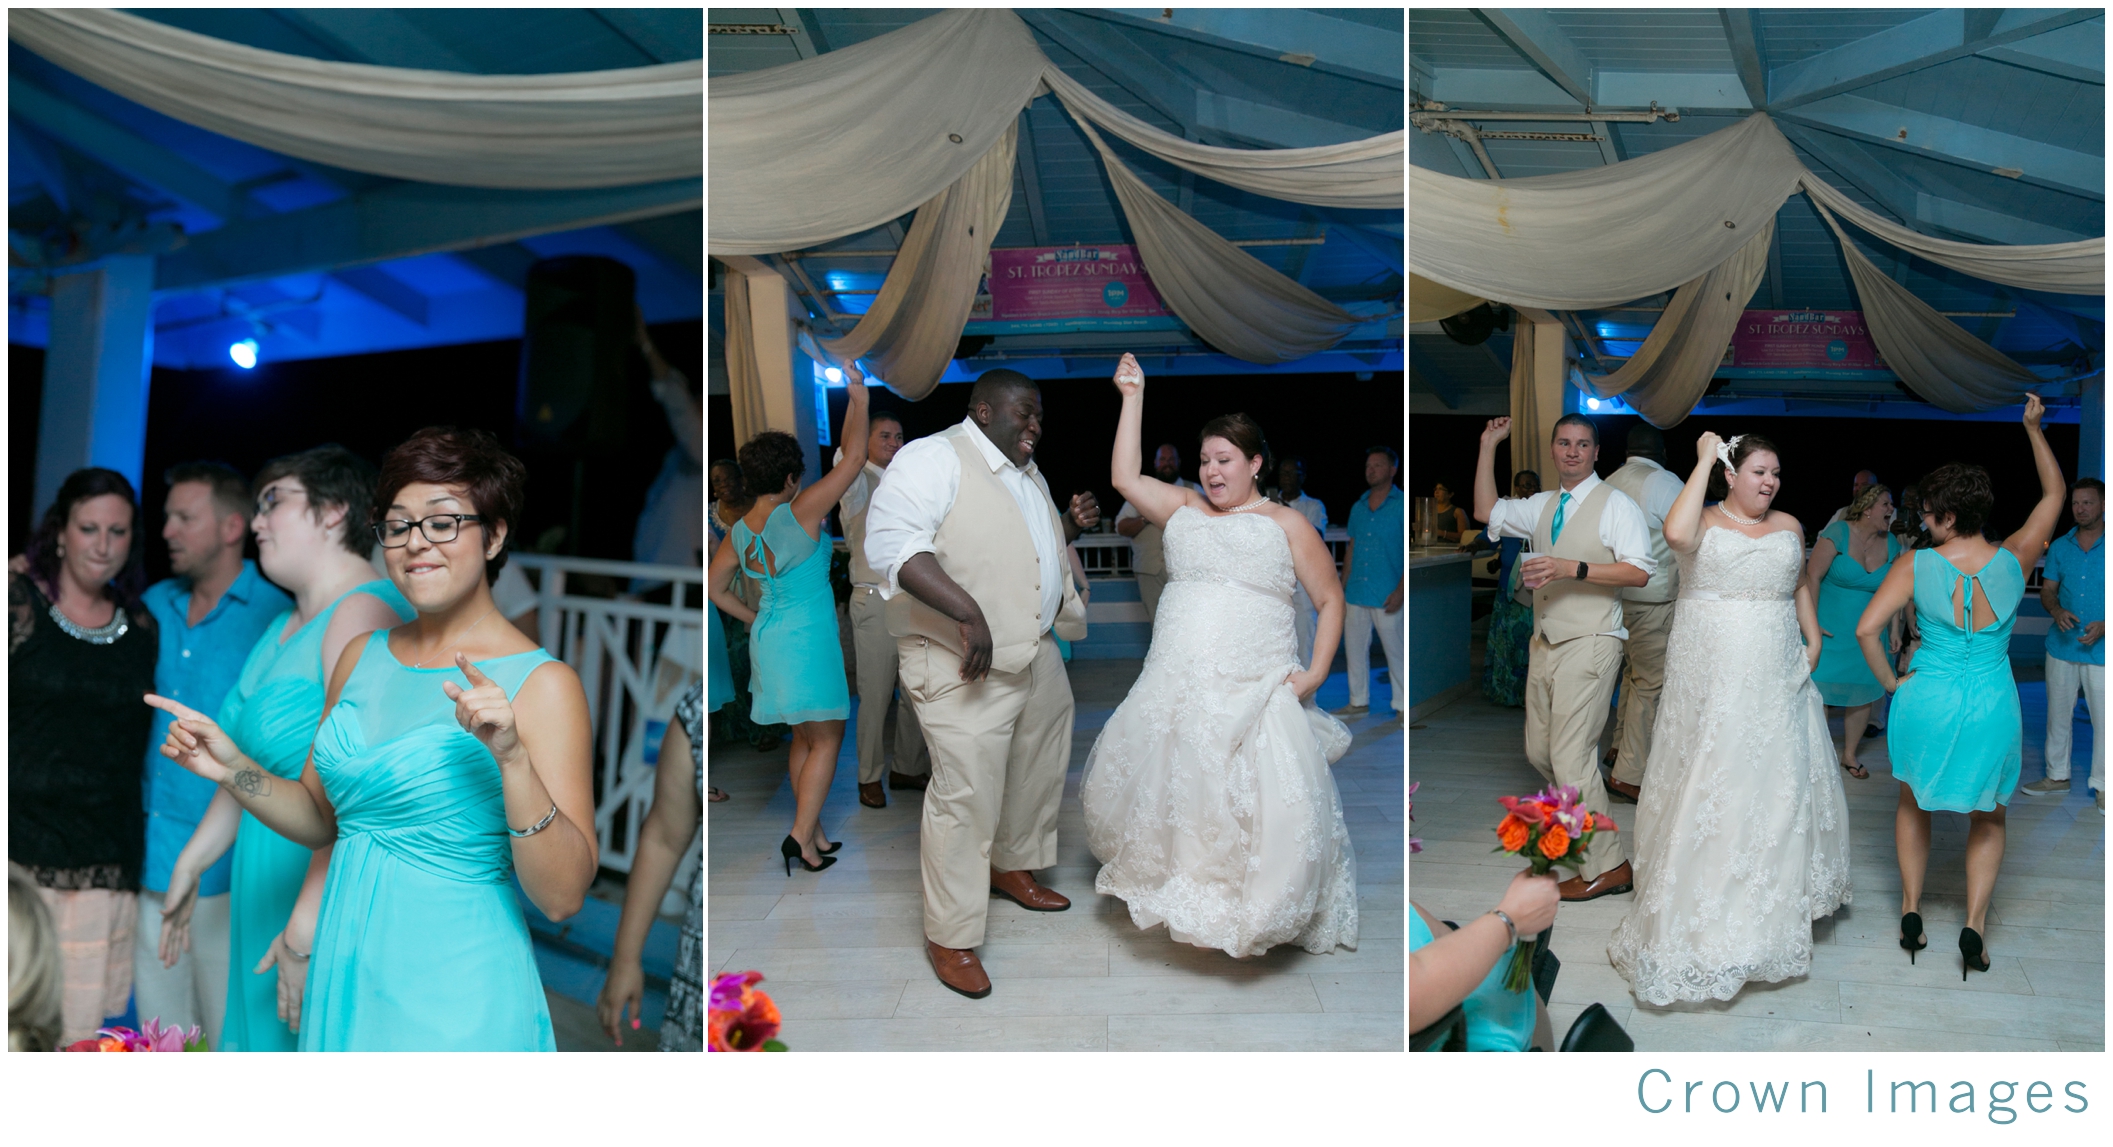 st thomas wedding photos at the marriott crown images_1717.jpg